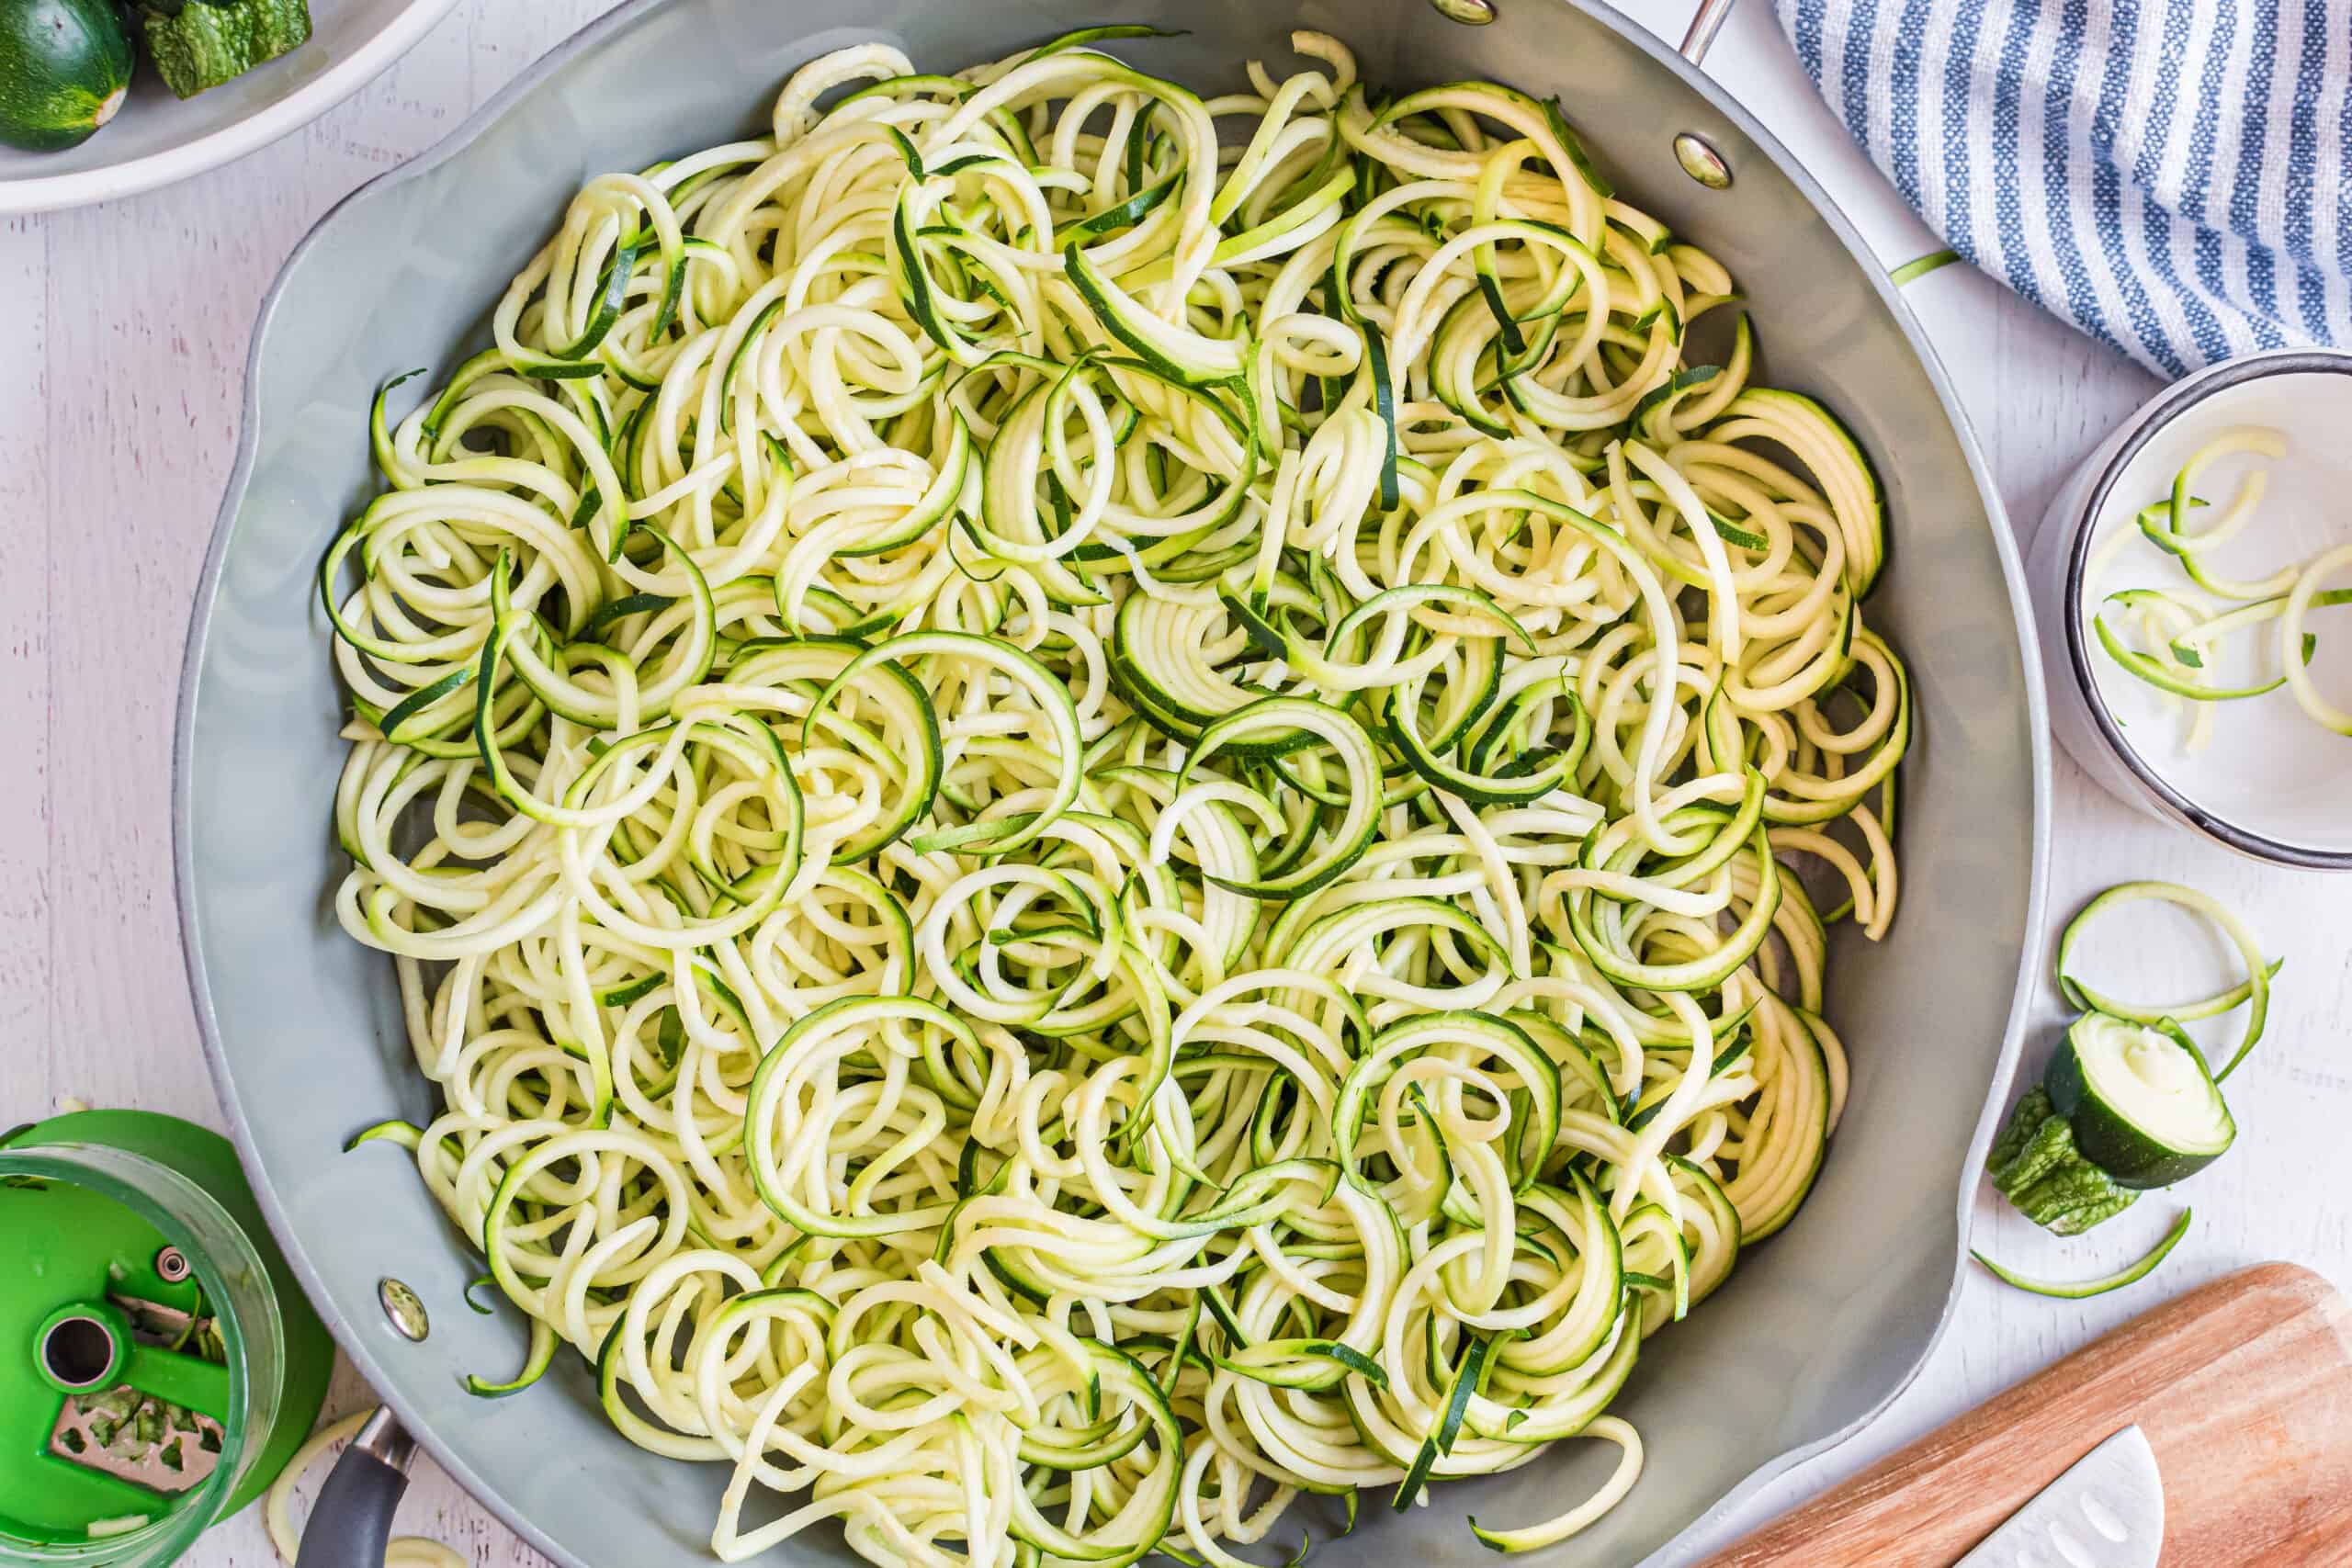 https://www.shugarysweets.com/wp-content/uploads/2020/07/zoodles-14-scaled.jpg